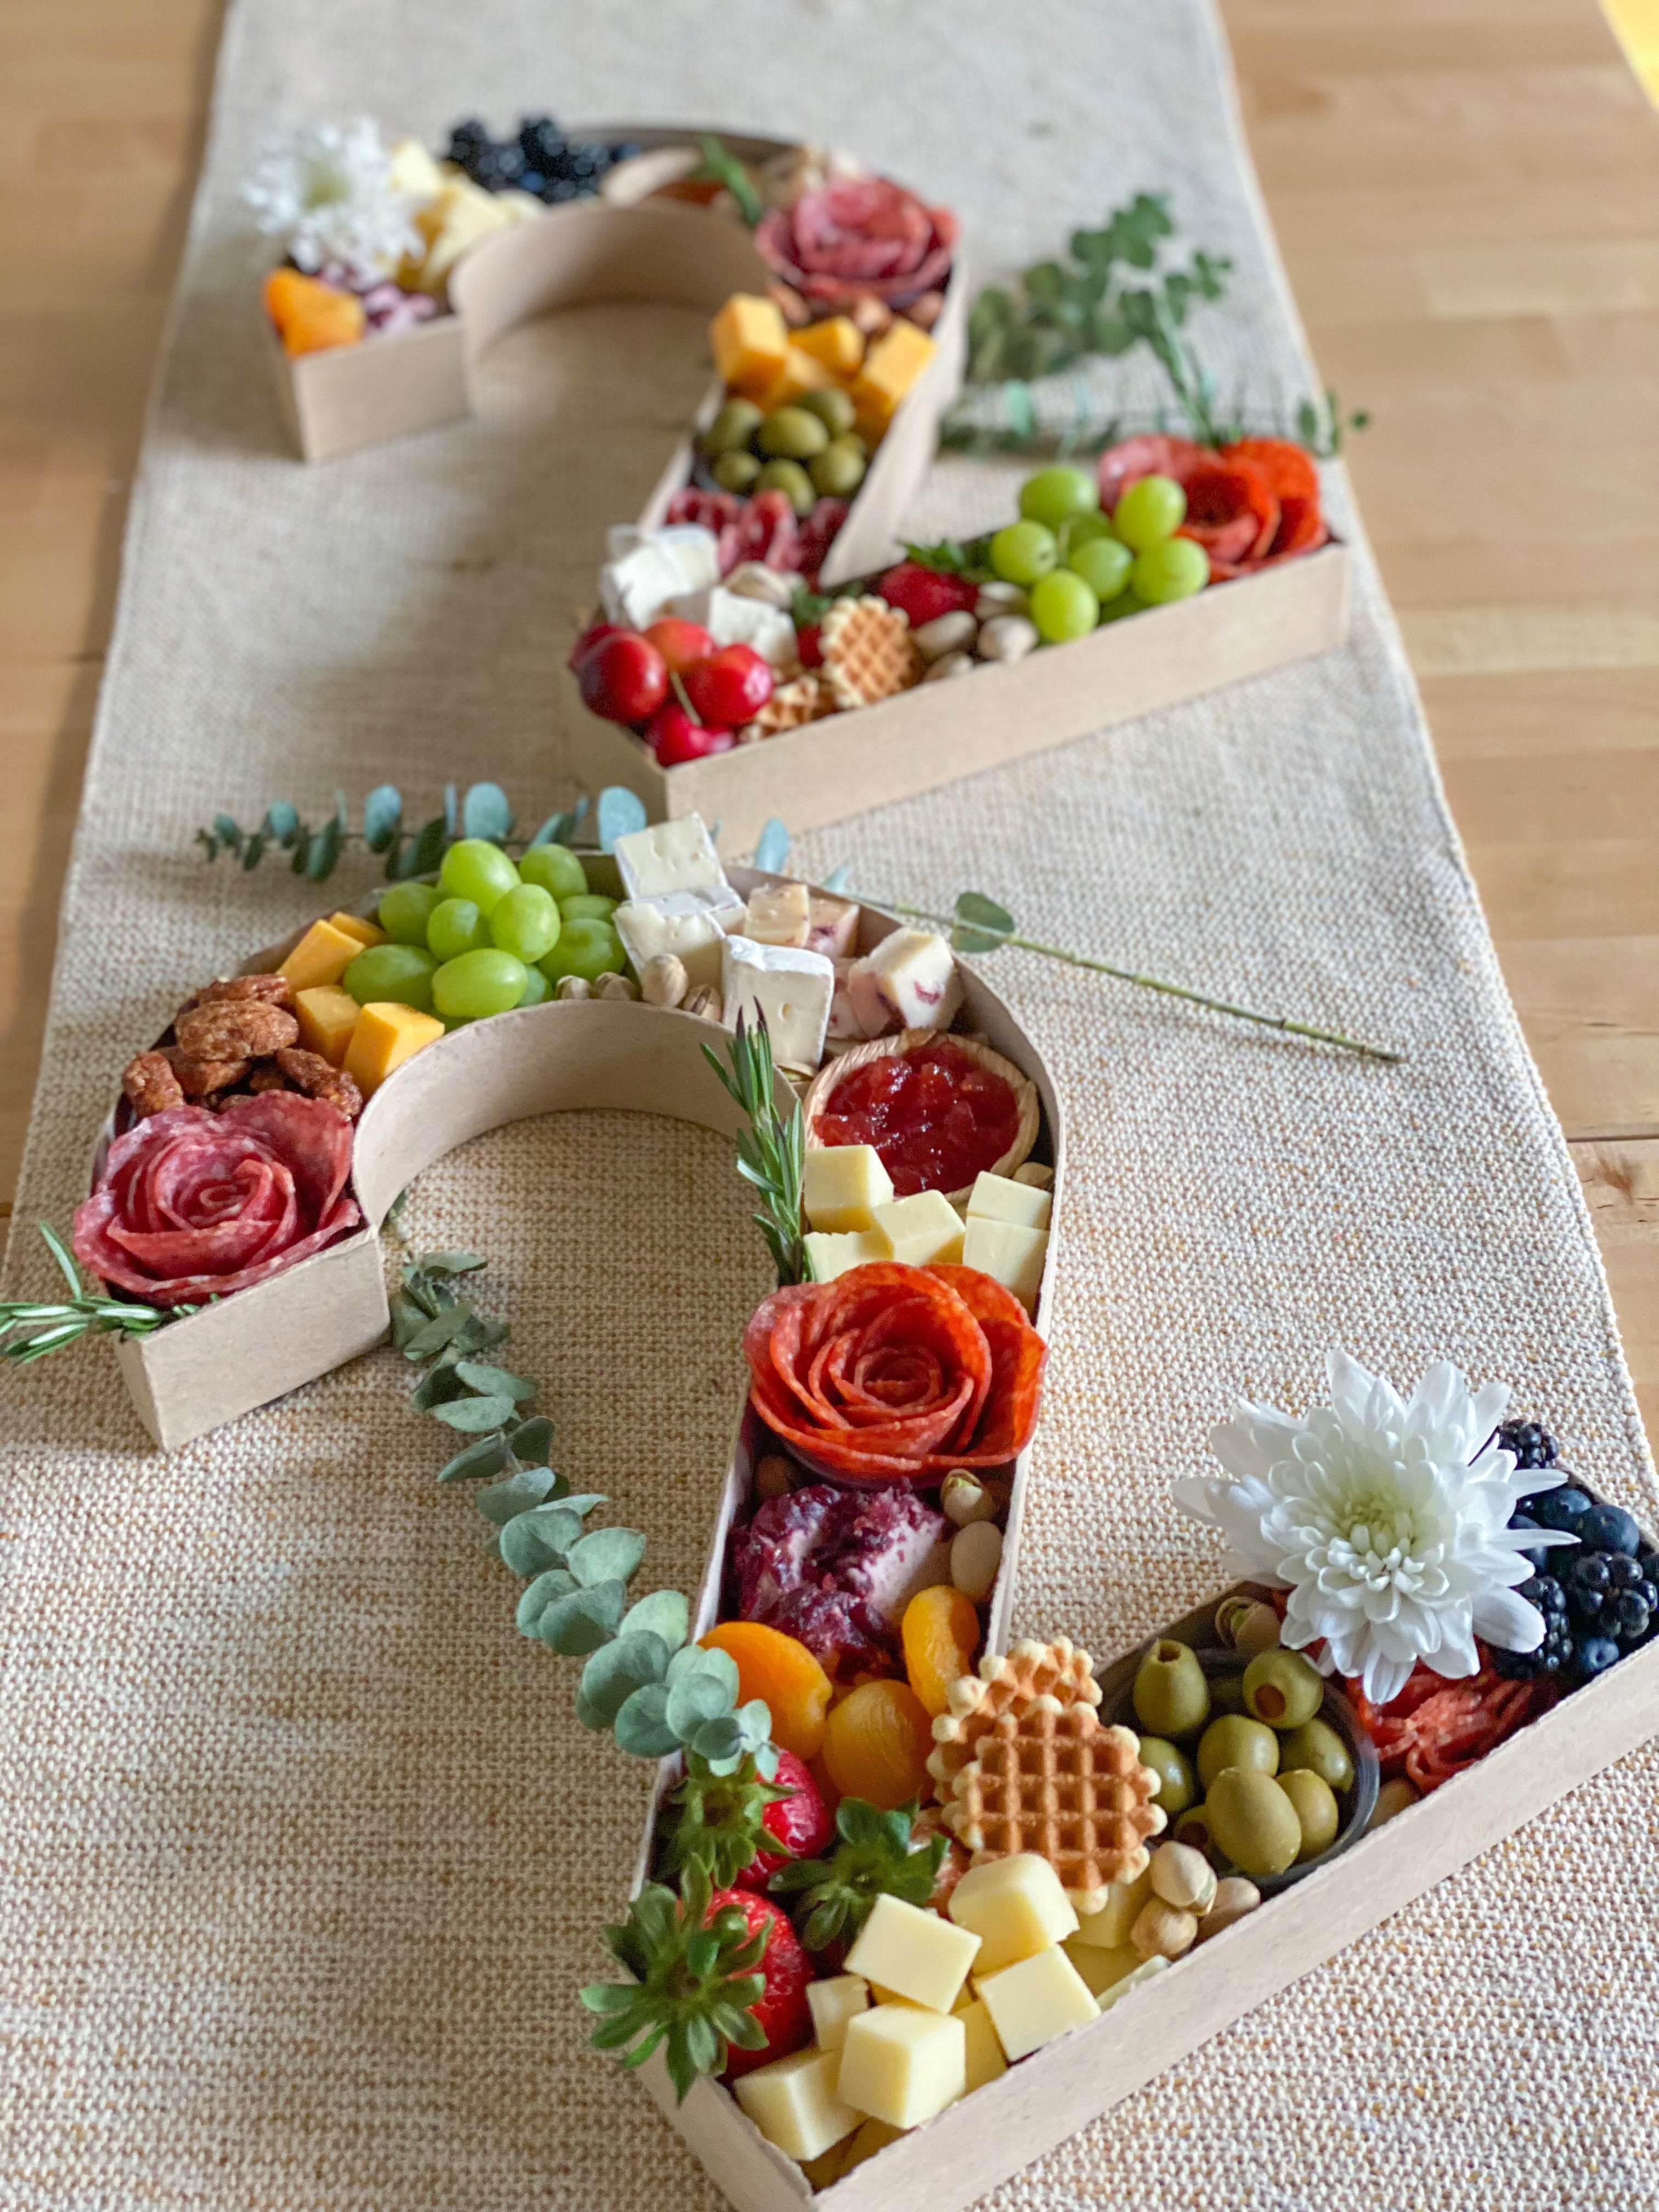 Charcuterie Letters - Charcuterie Crossing